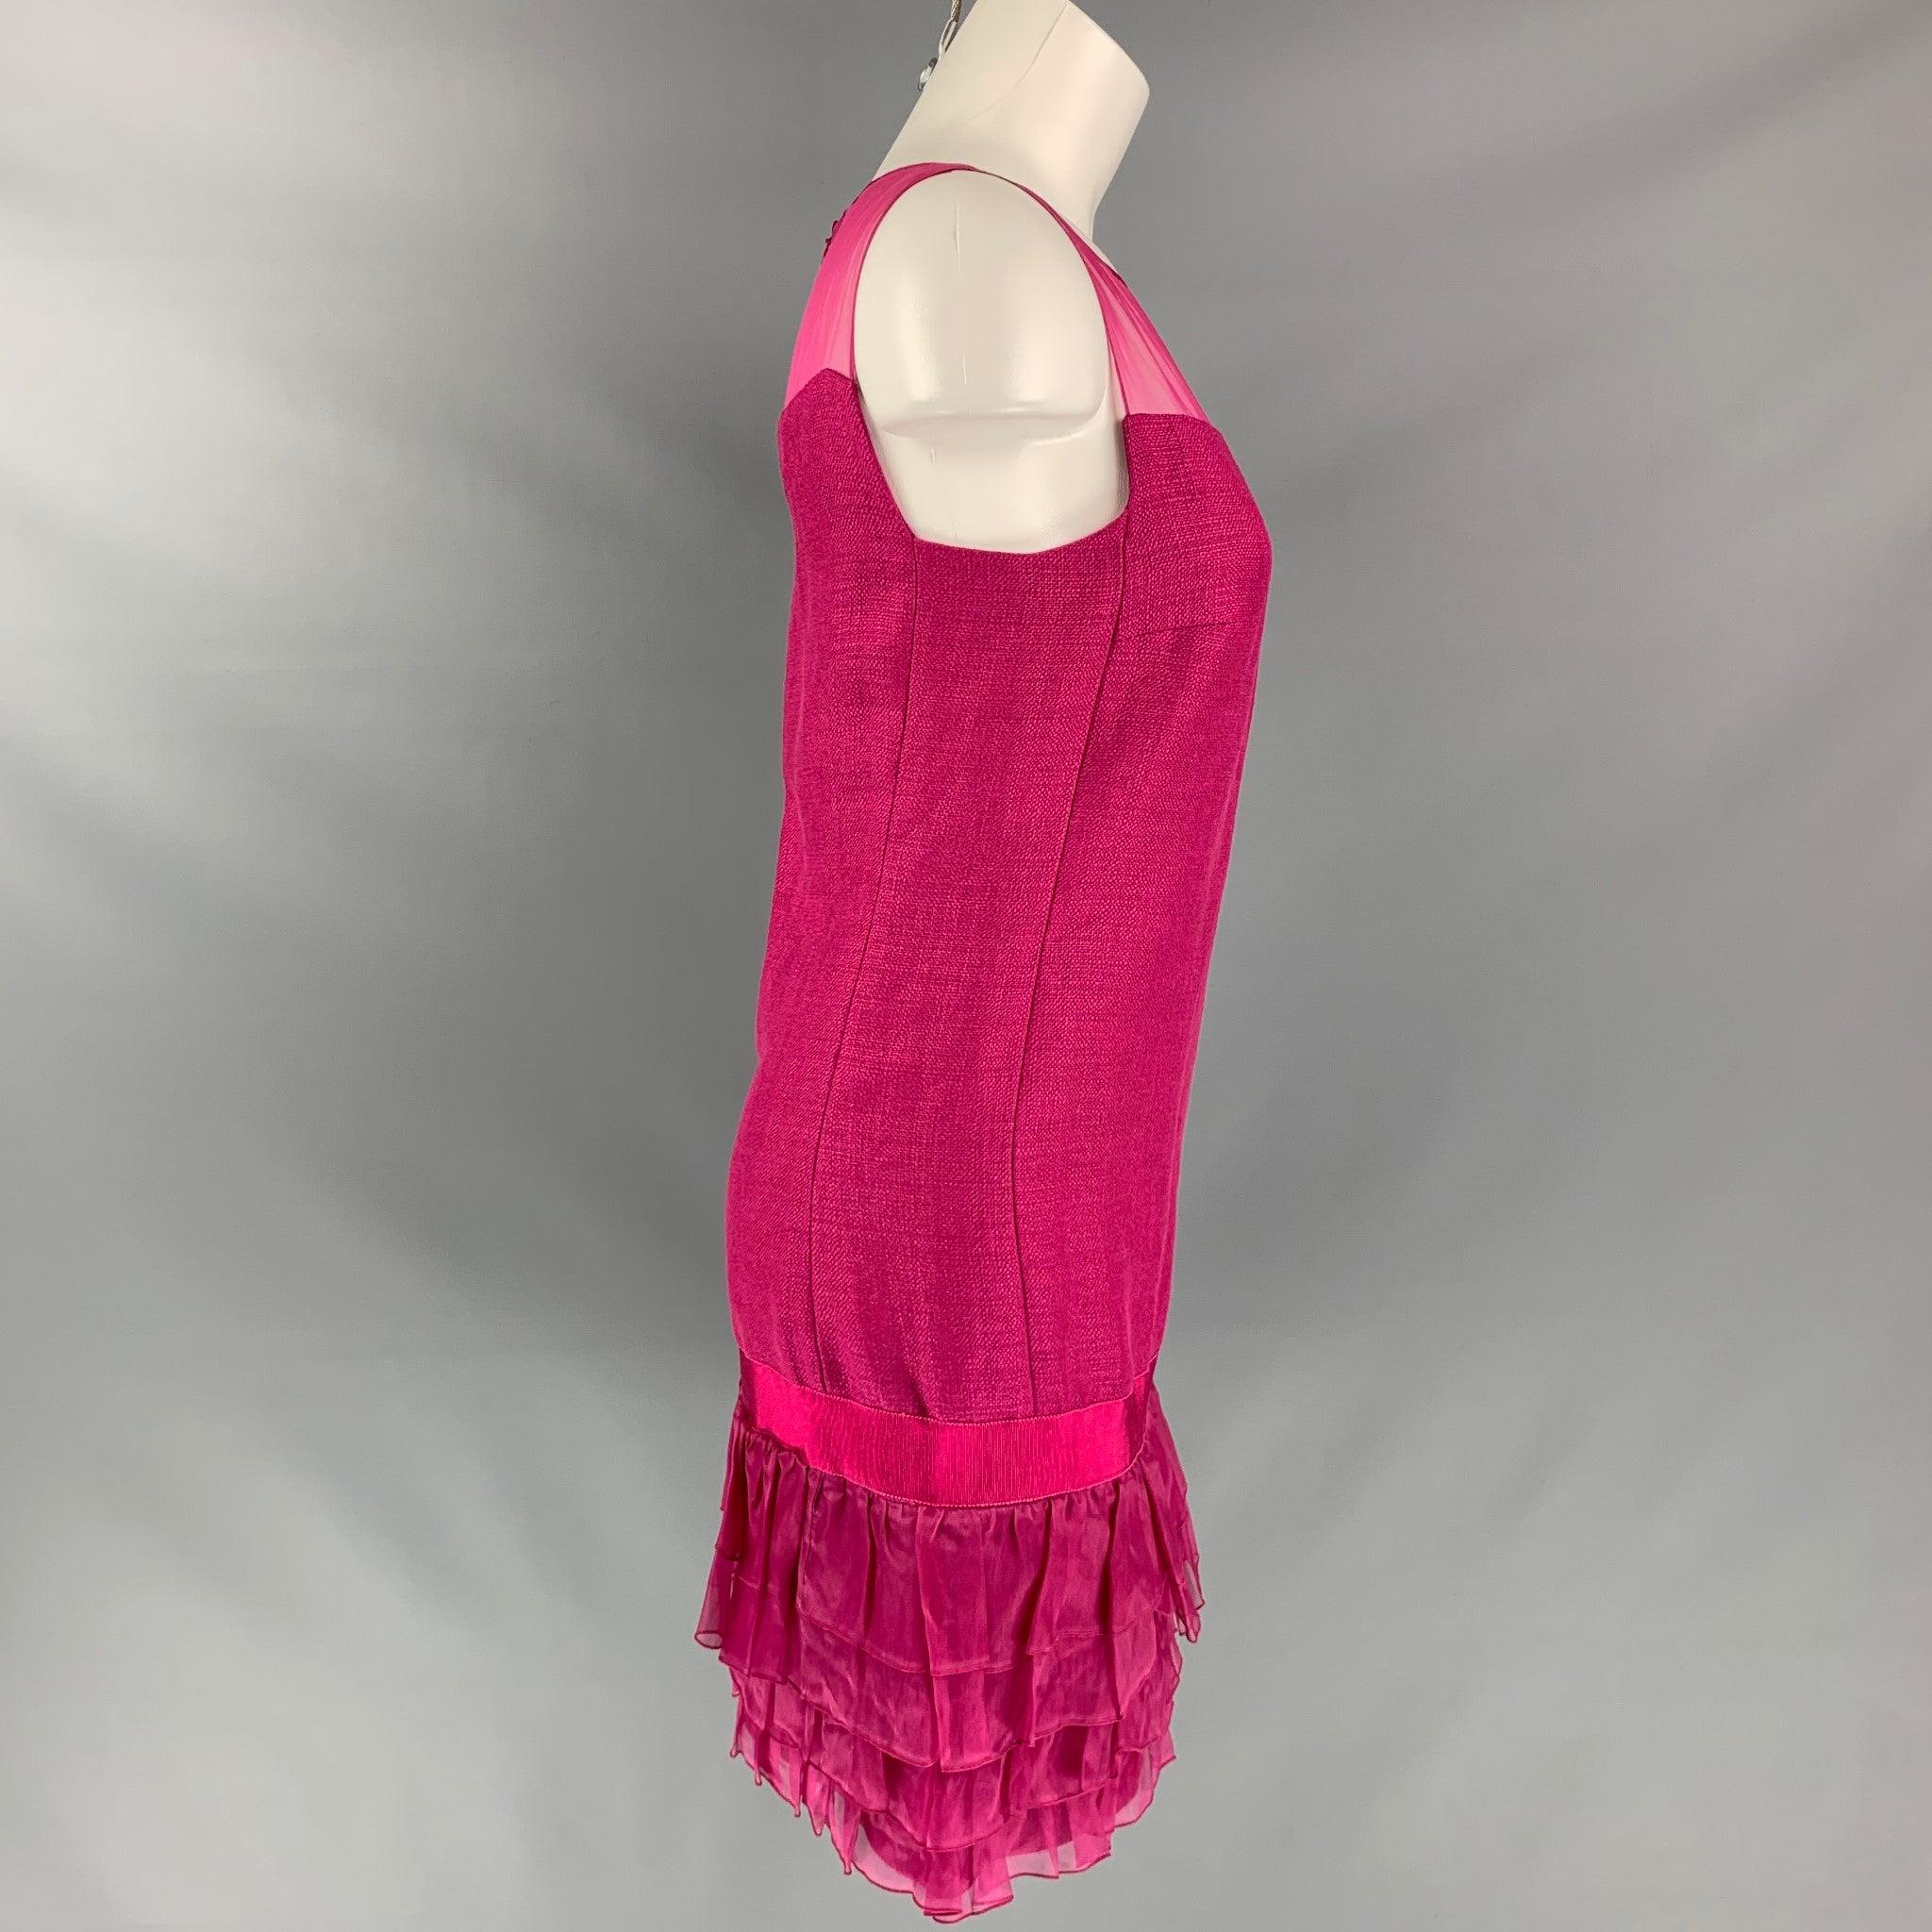 GIAMBATTISTA VALLI tunic above knee dress comes in raspberry linen and viscose fabric and full invisible zipper closure at center back featuring ruffled detail at bottom hem and see through detail at the shoulder. Made in Italy.
Excellent Good